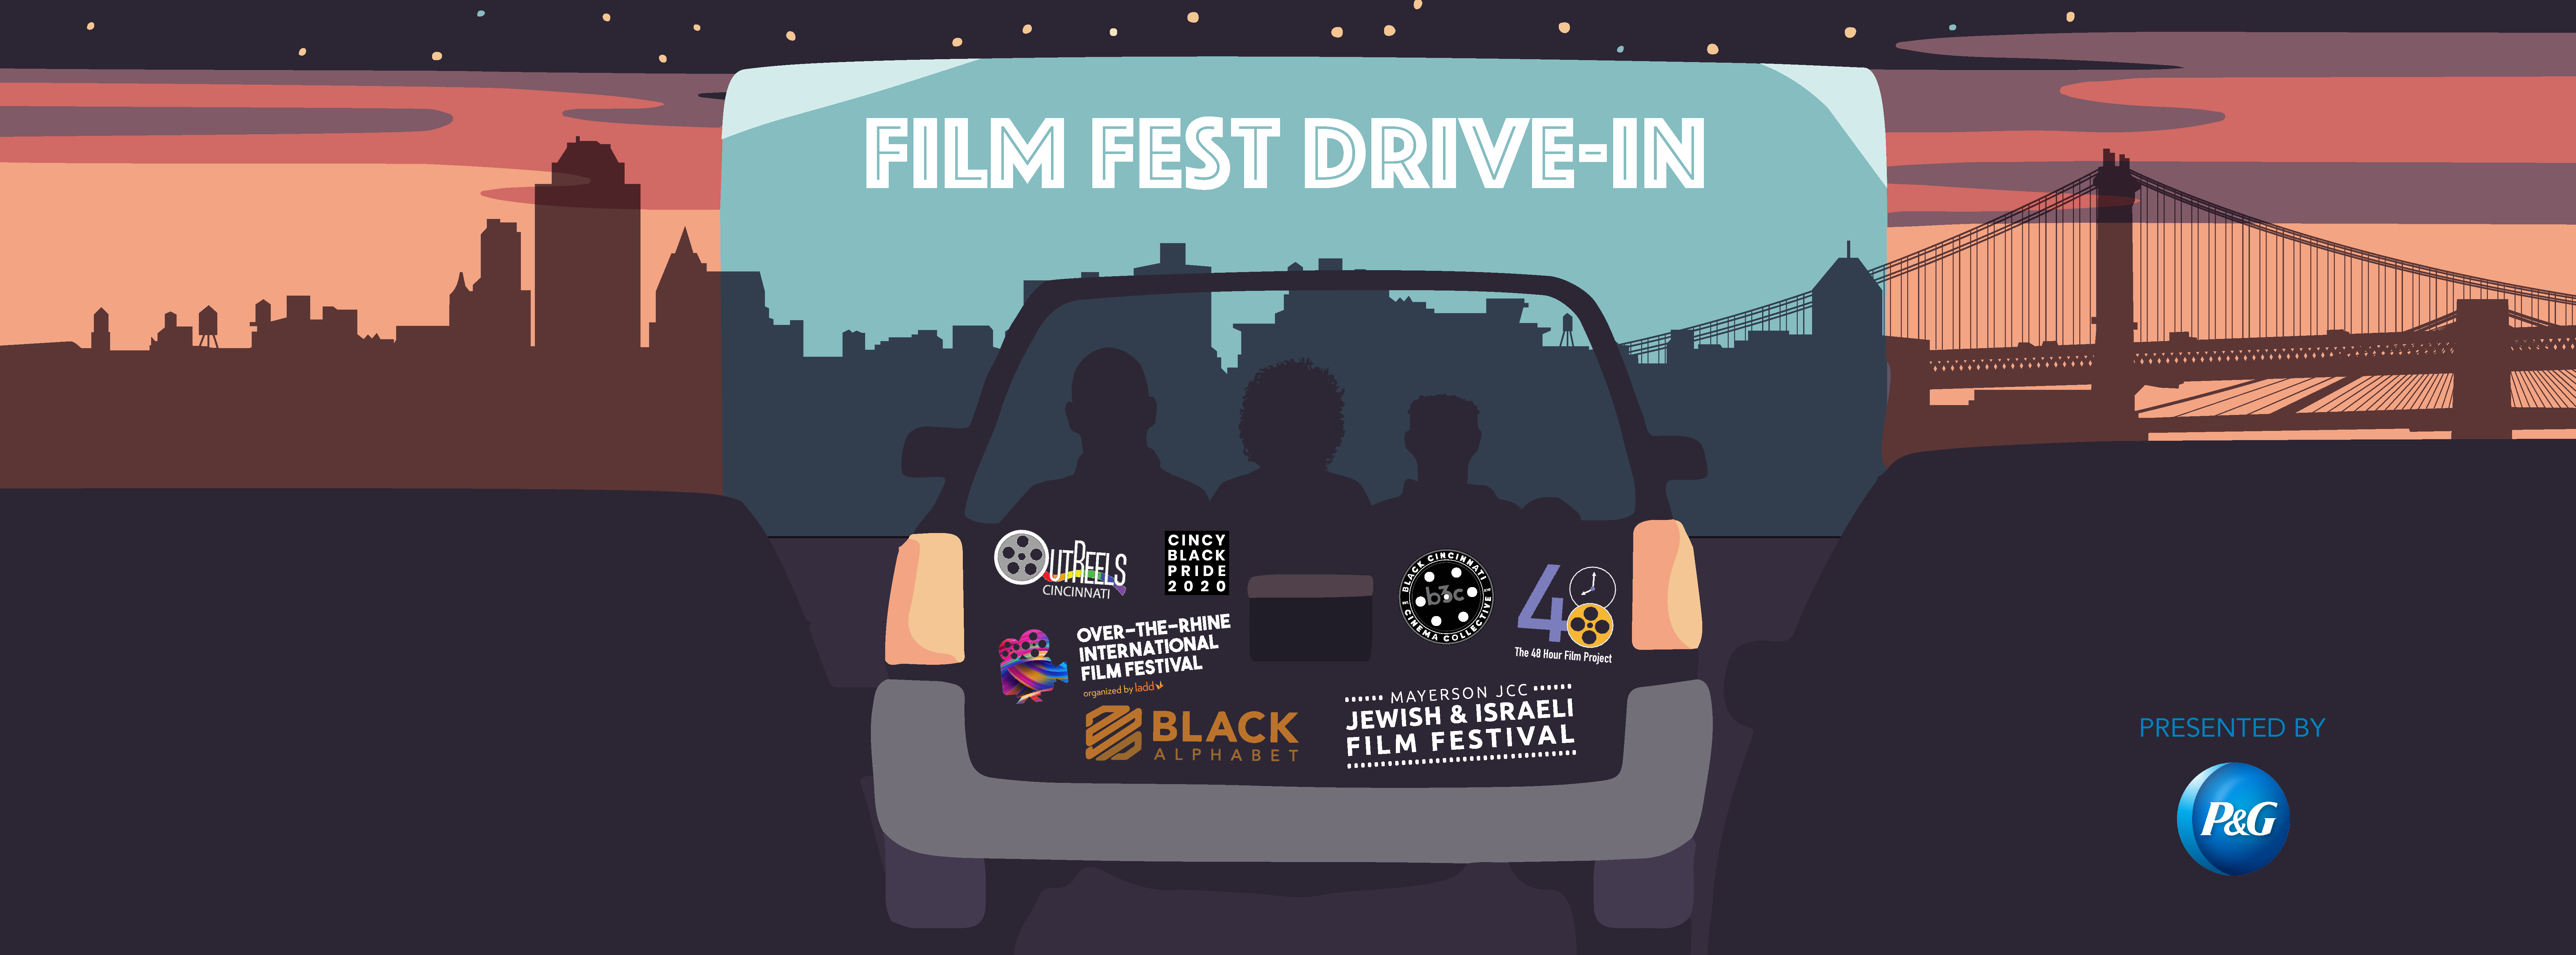 Illustration with a car facing a drive-in movie screen with the Cincinnati skyline behind the screen. On the screen it says, "Film Fest Drive-In." Film festival logos are on the back of the car and "Presented by P&G" is in the lower right hand corner.